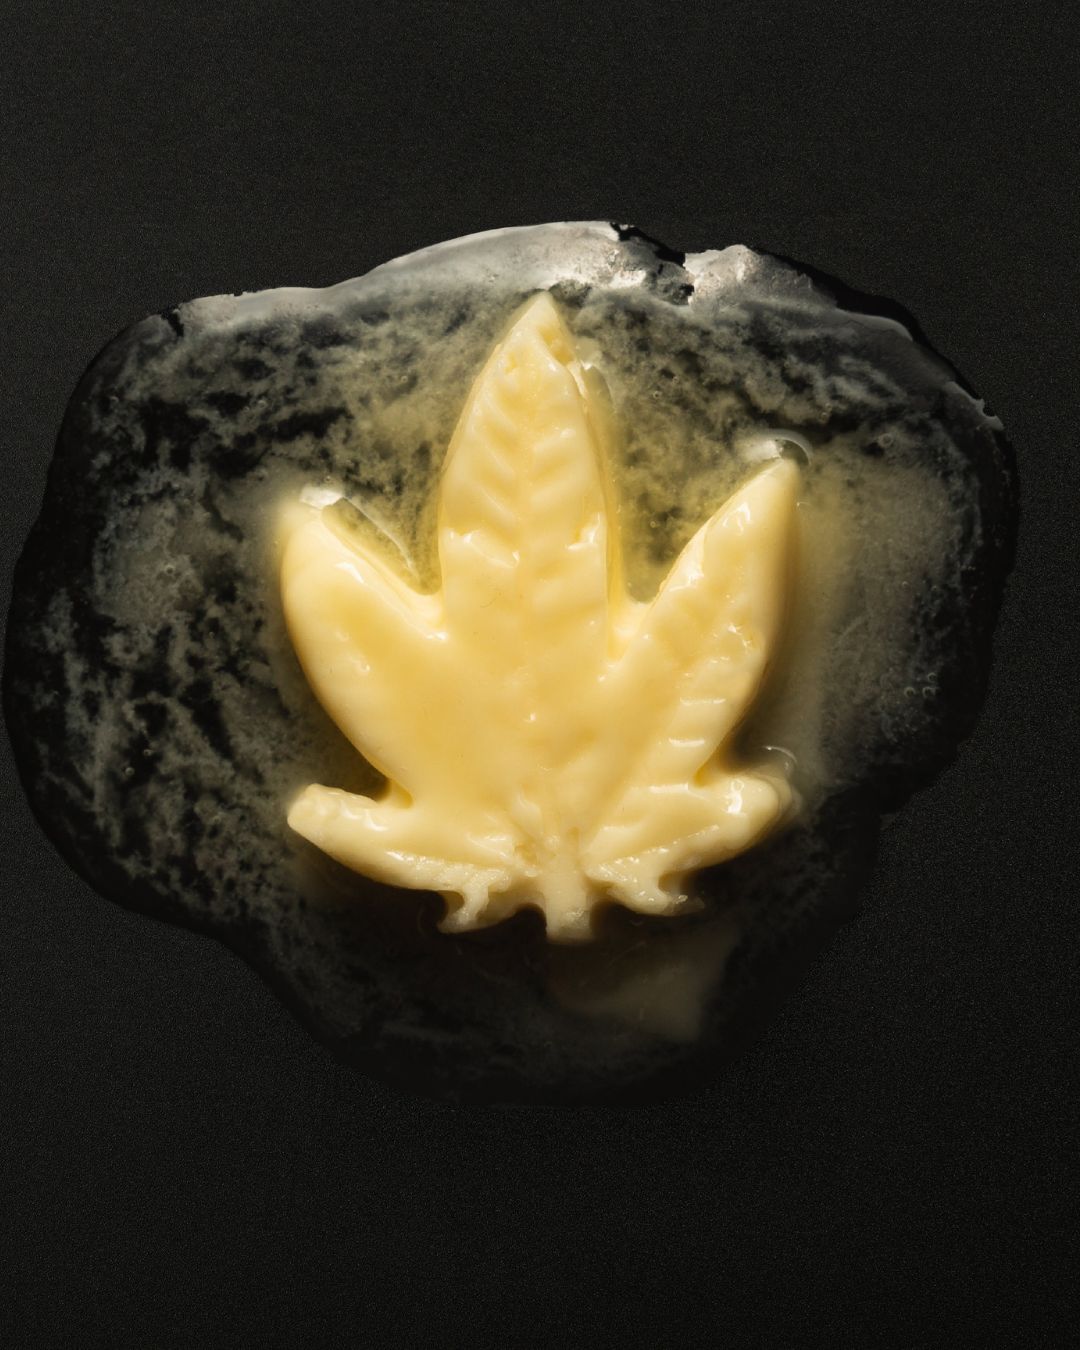 How to make your own cannabis-infused butter